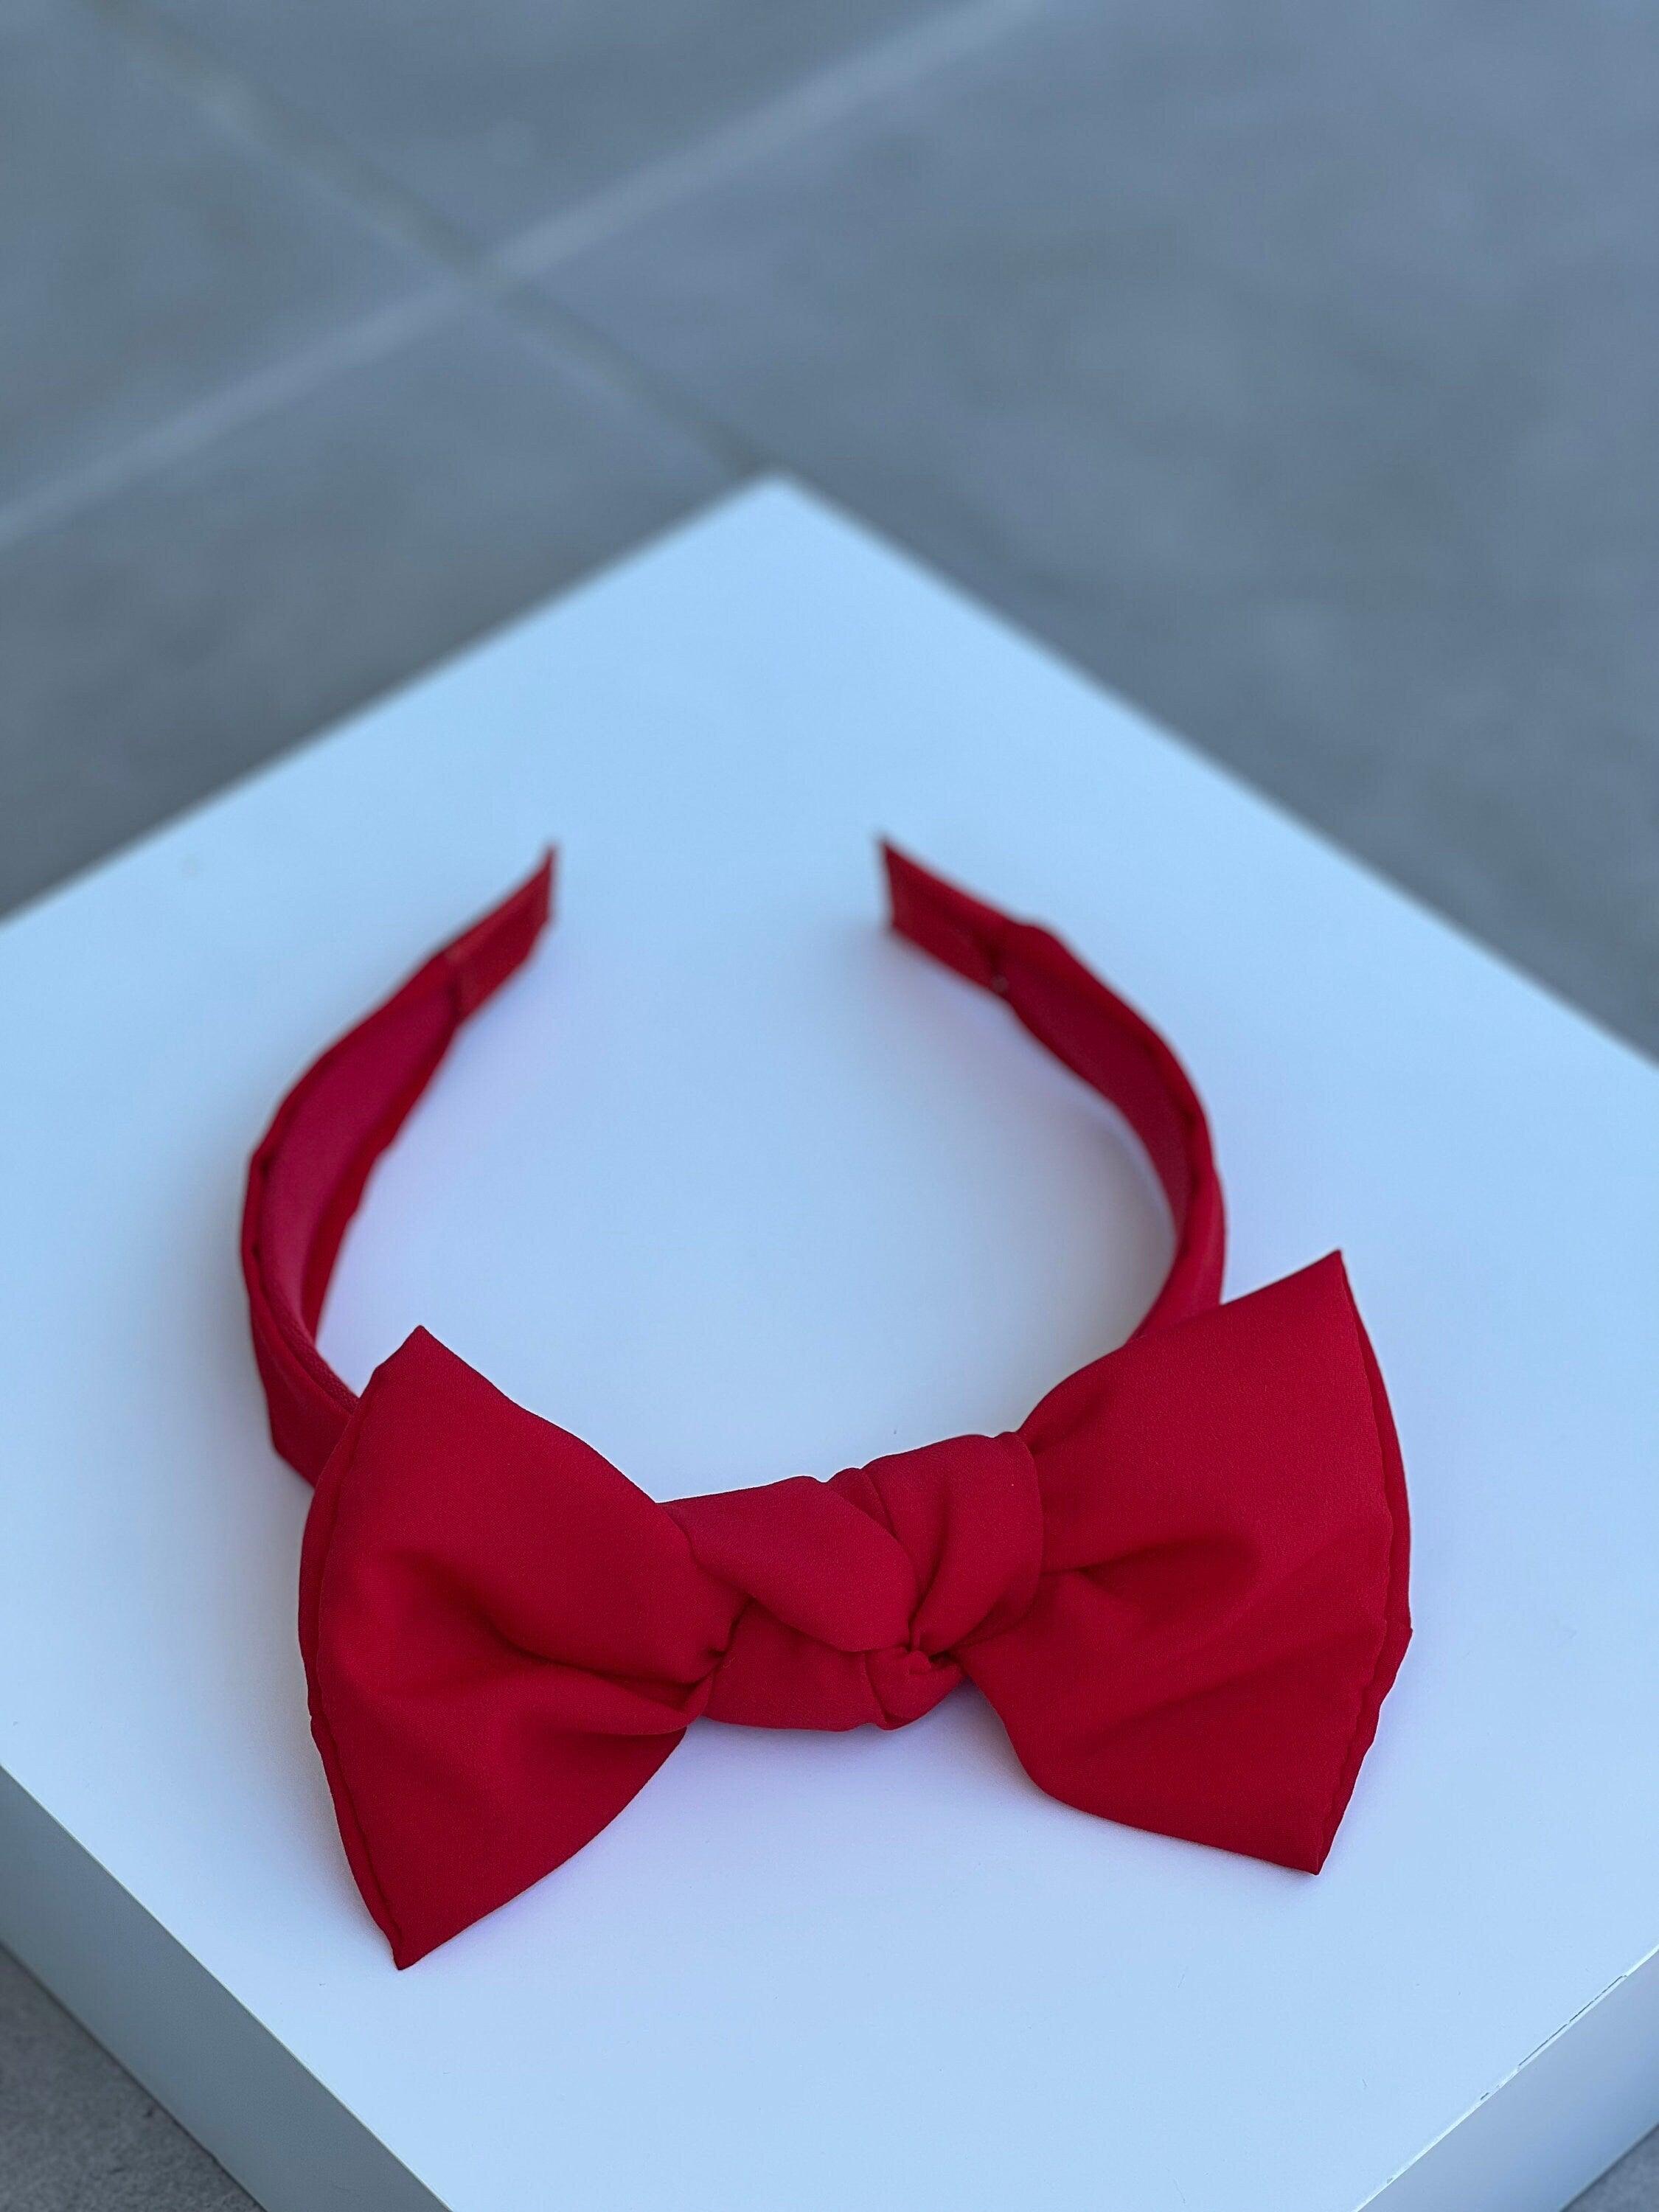 Beautiful Red Viscose Crepe Bow Headband for Women - Classic Thin Hair Band with Comfortable Fit and Stylish Red Bow Tie Design available at Moyoni Design